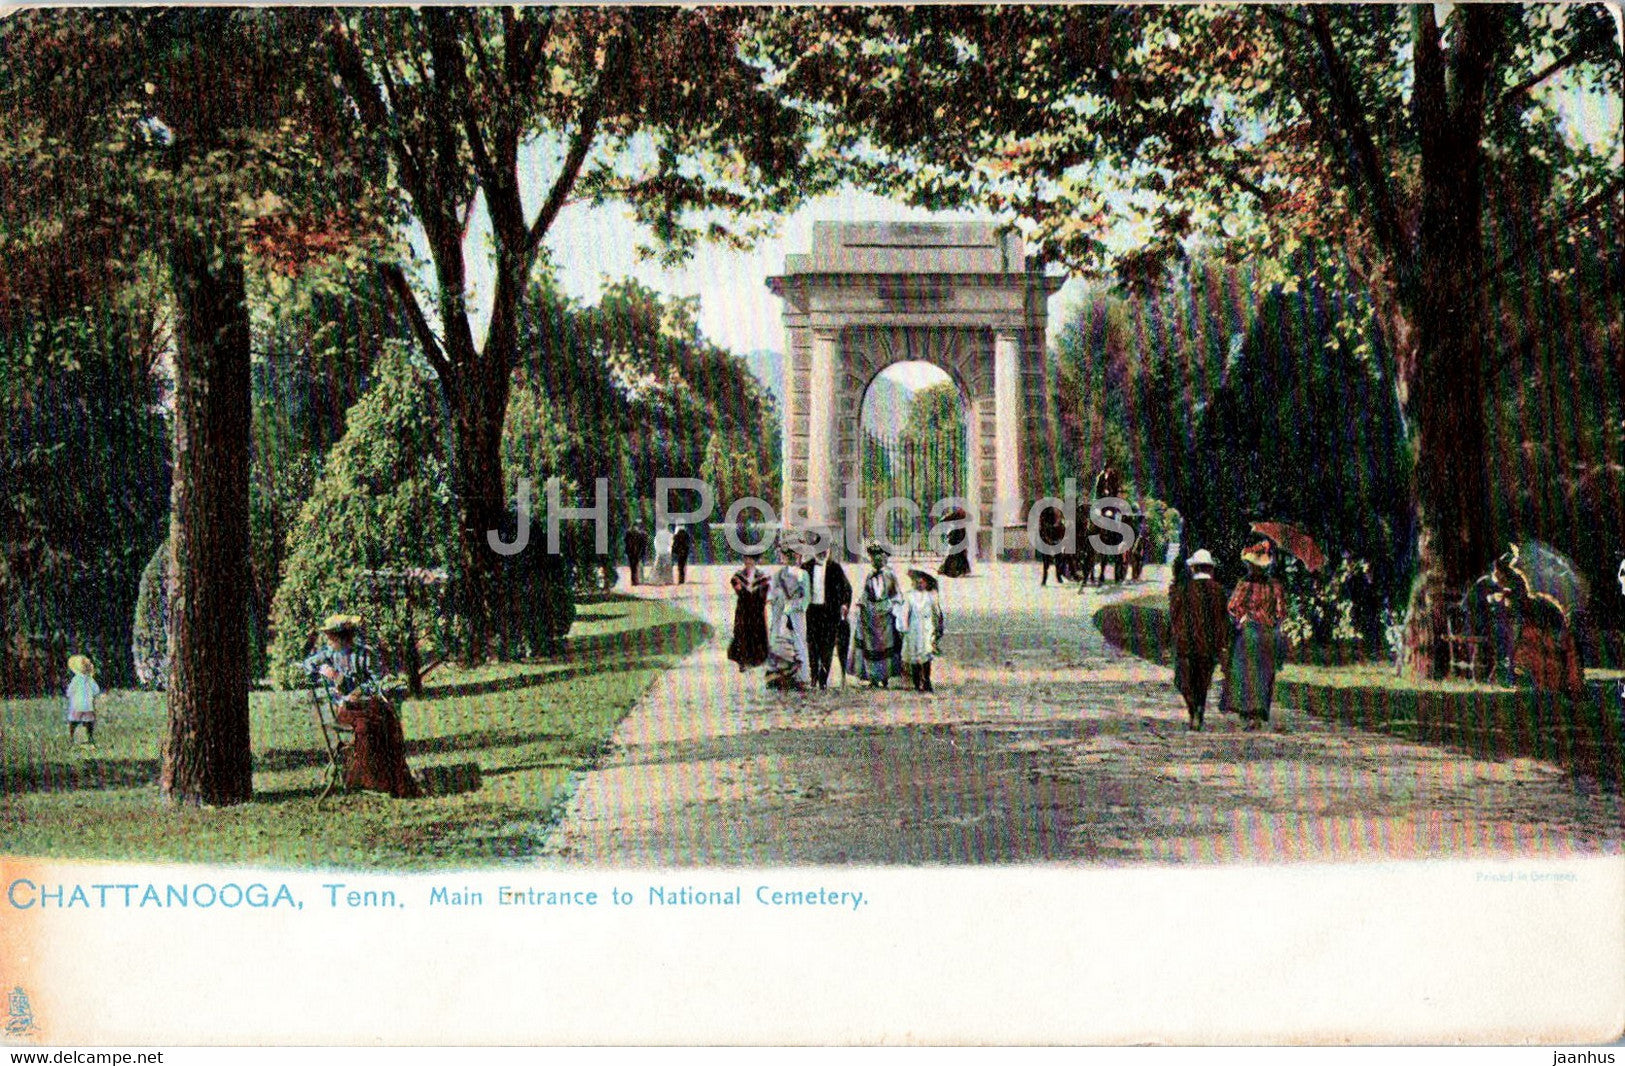 Chattanooga - Main Entrance to to National Cemetery - Tenn. - 2176 - old postcard - USA - unused - JH Postcards